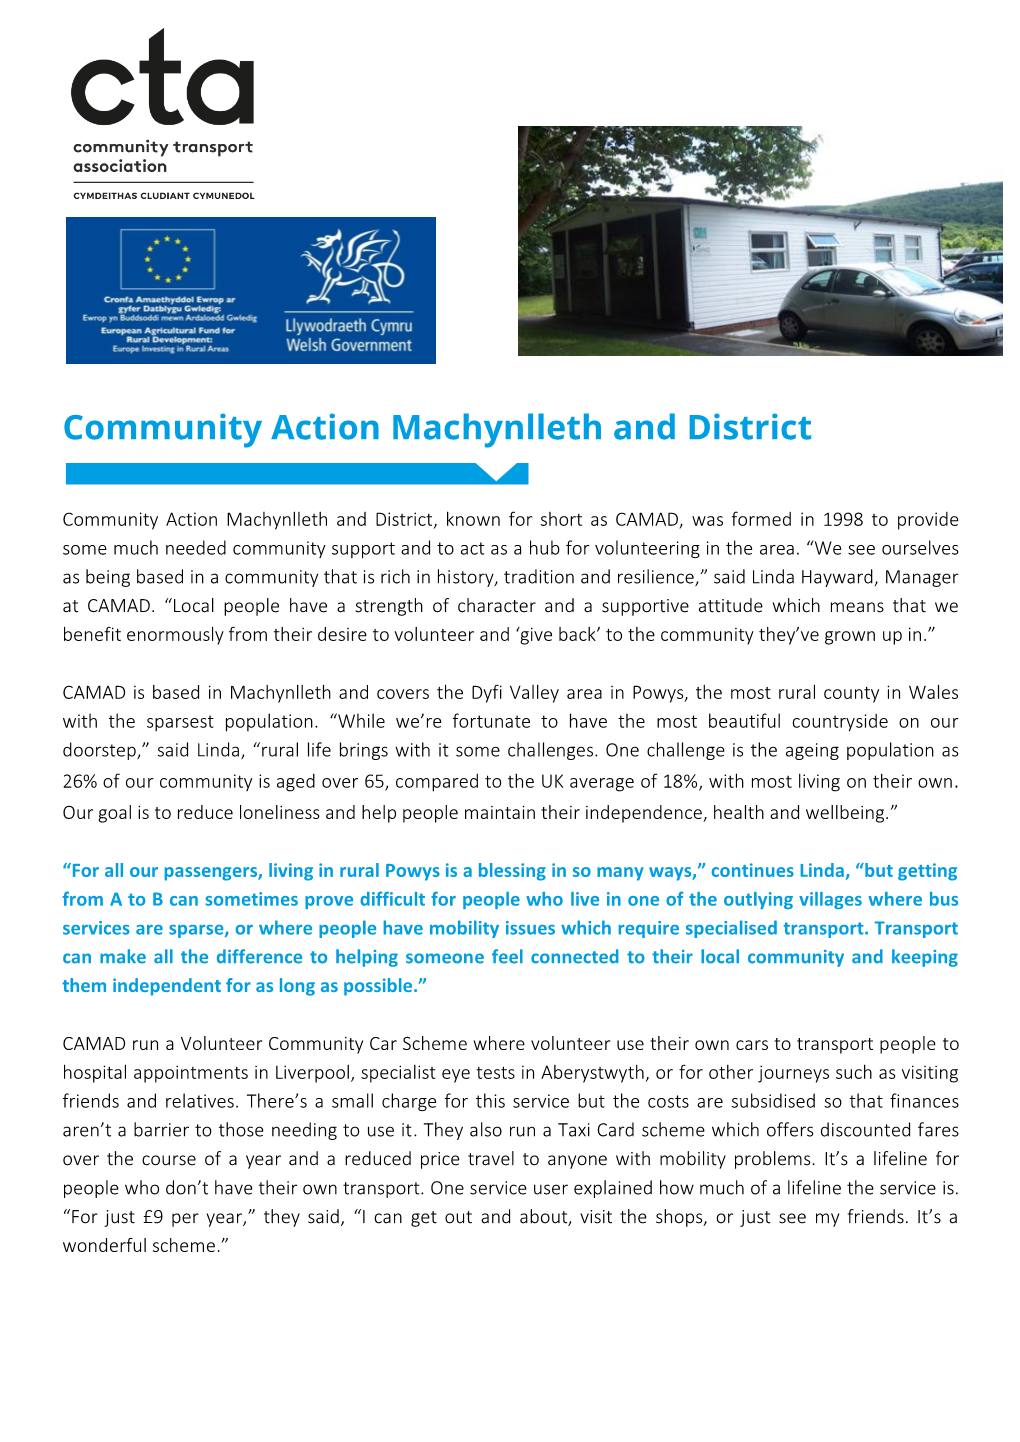 Community Action Machynlleth and District